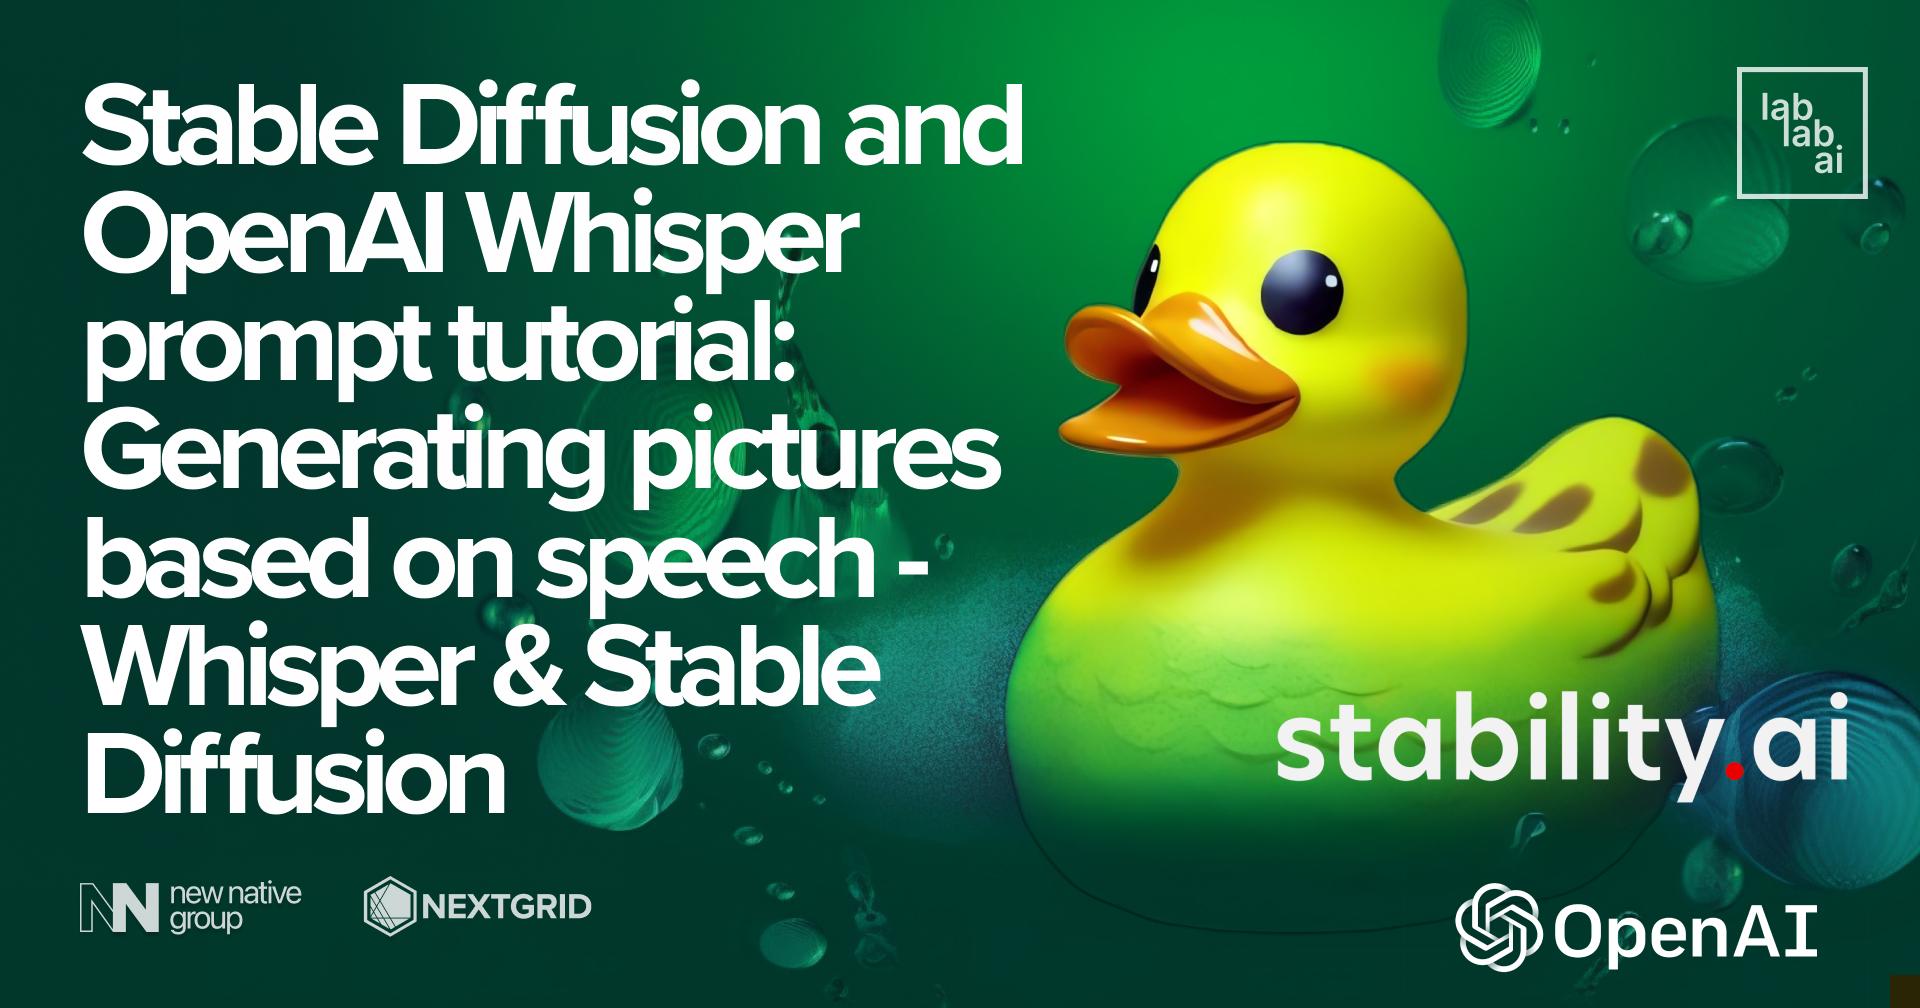 Stable Diffusion and OpenAI Whisper prompt tutorial: Generating pictures based on speech - Whisper & Stable Diffusion